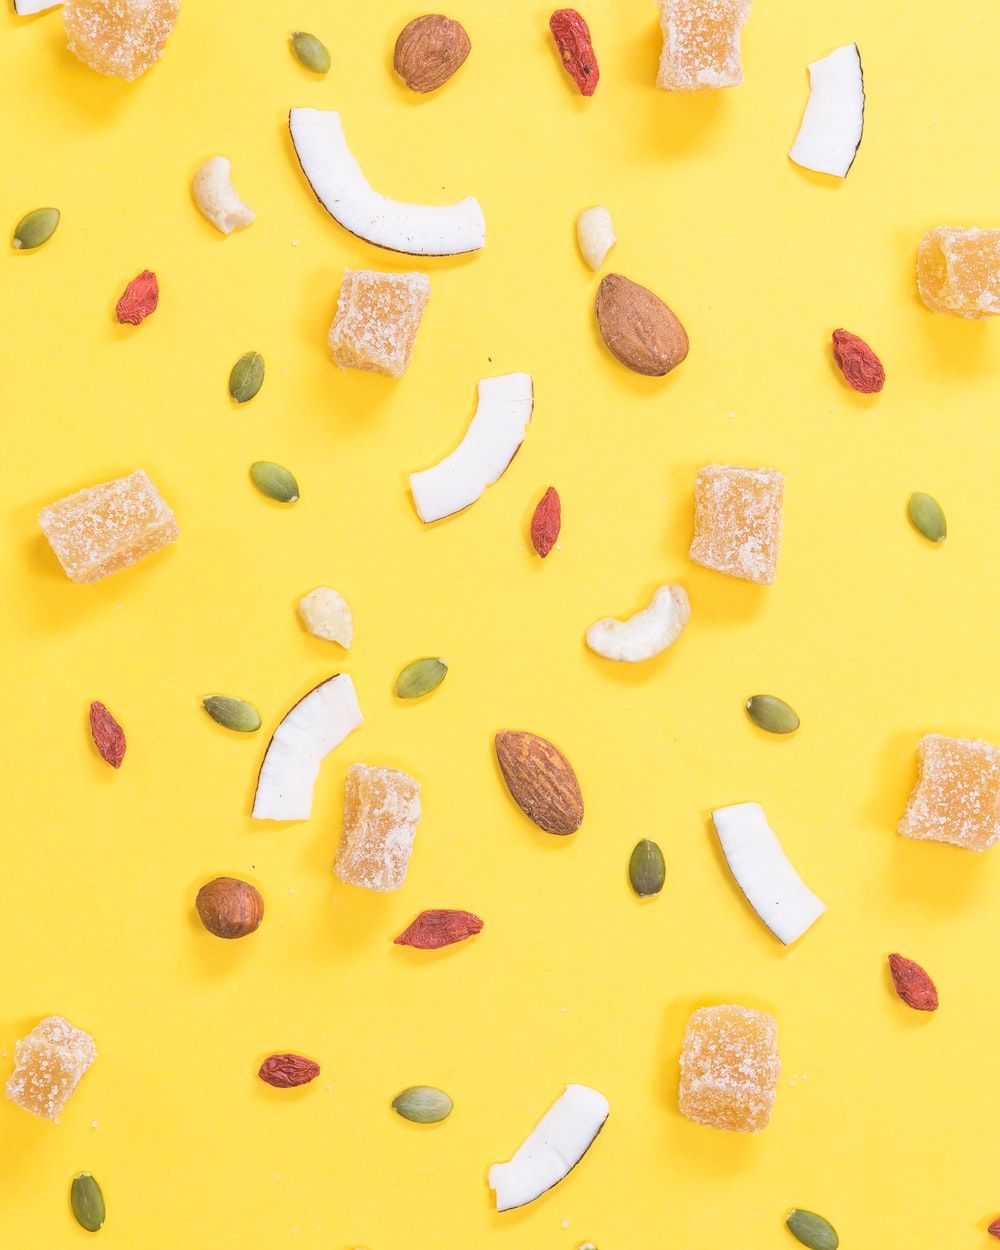 A close up of some candy on yellow - Food, foodie